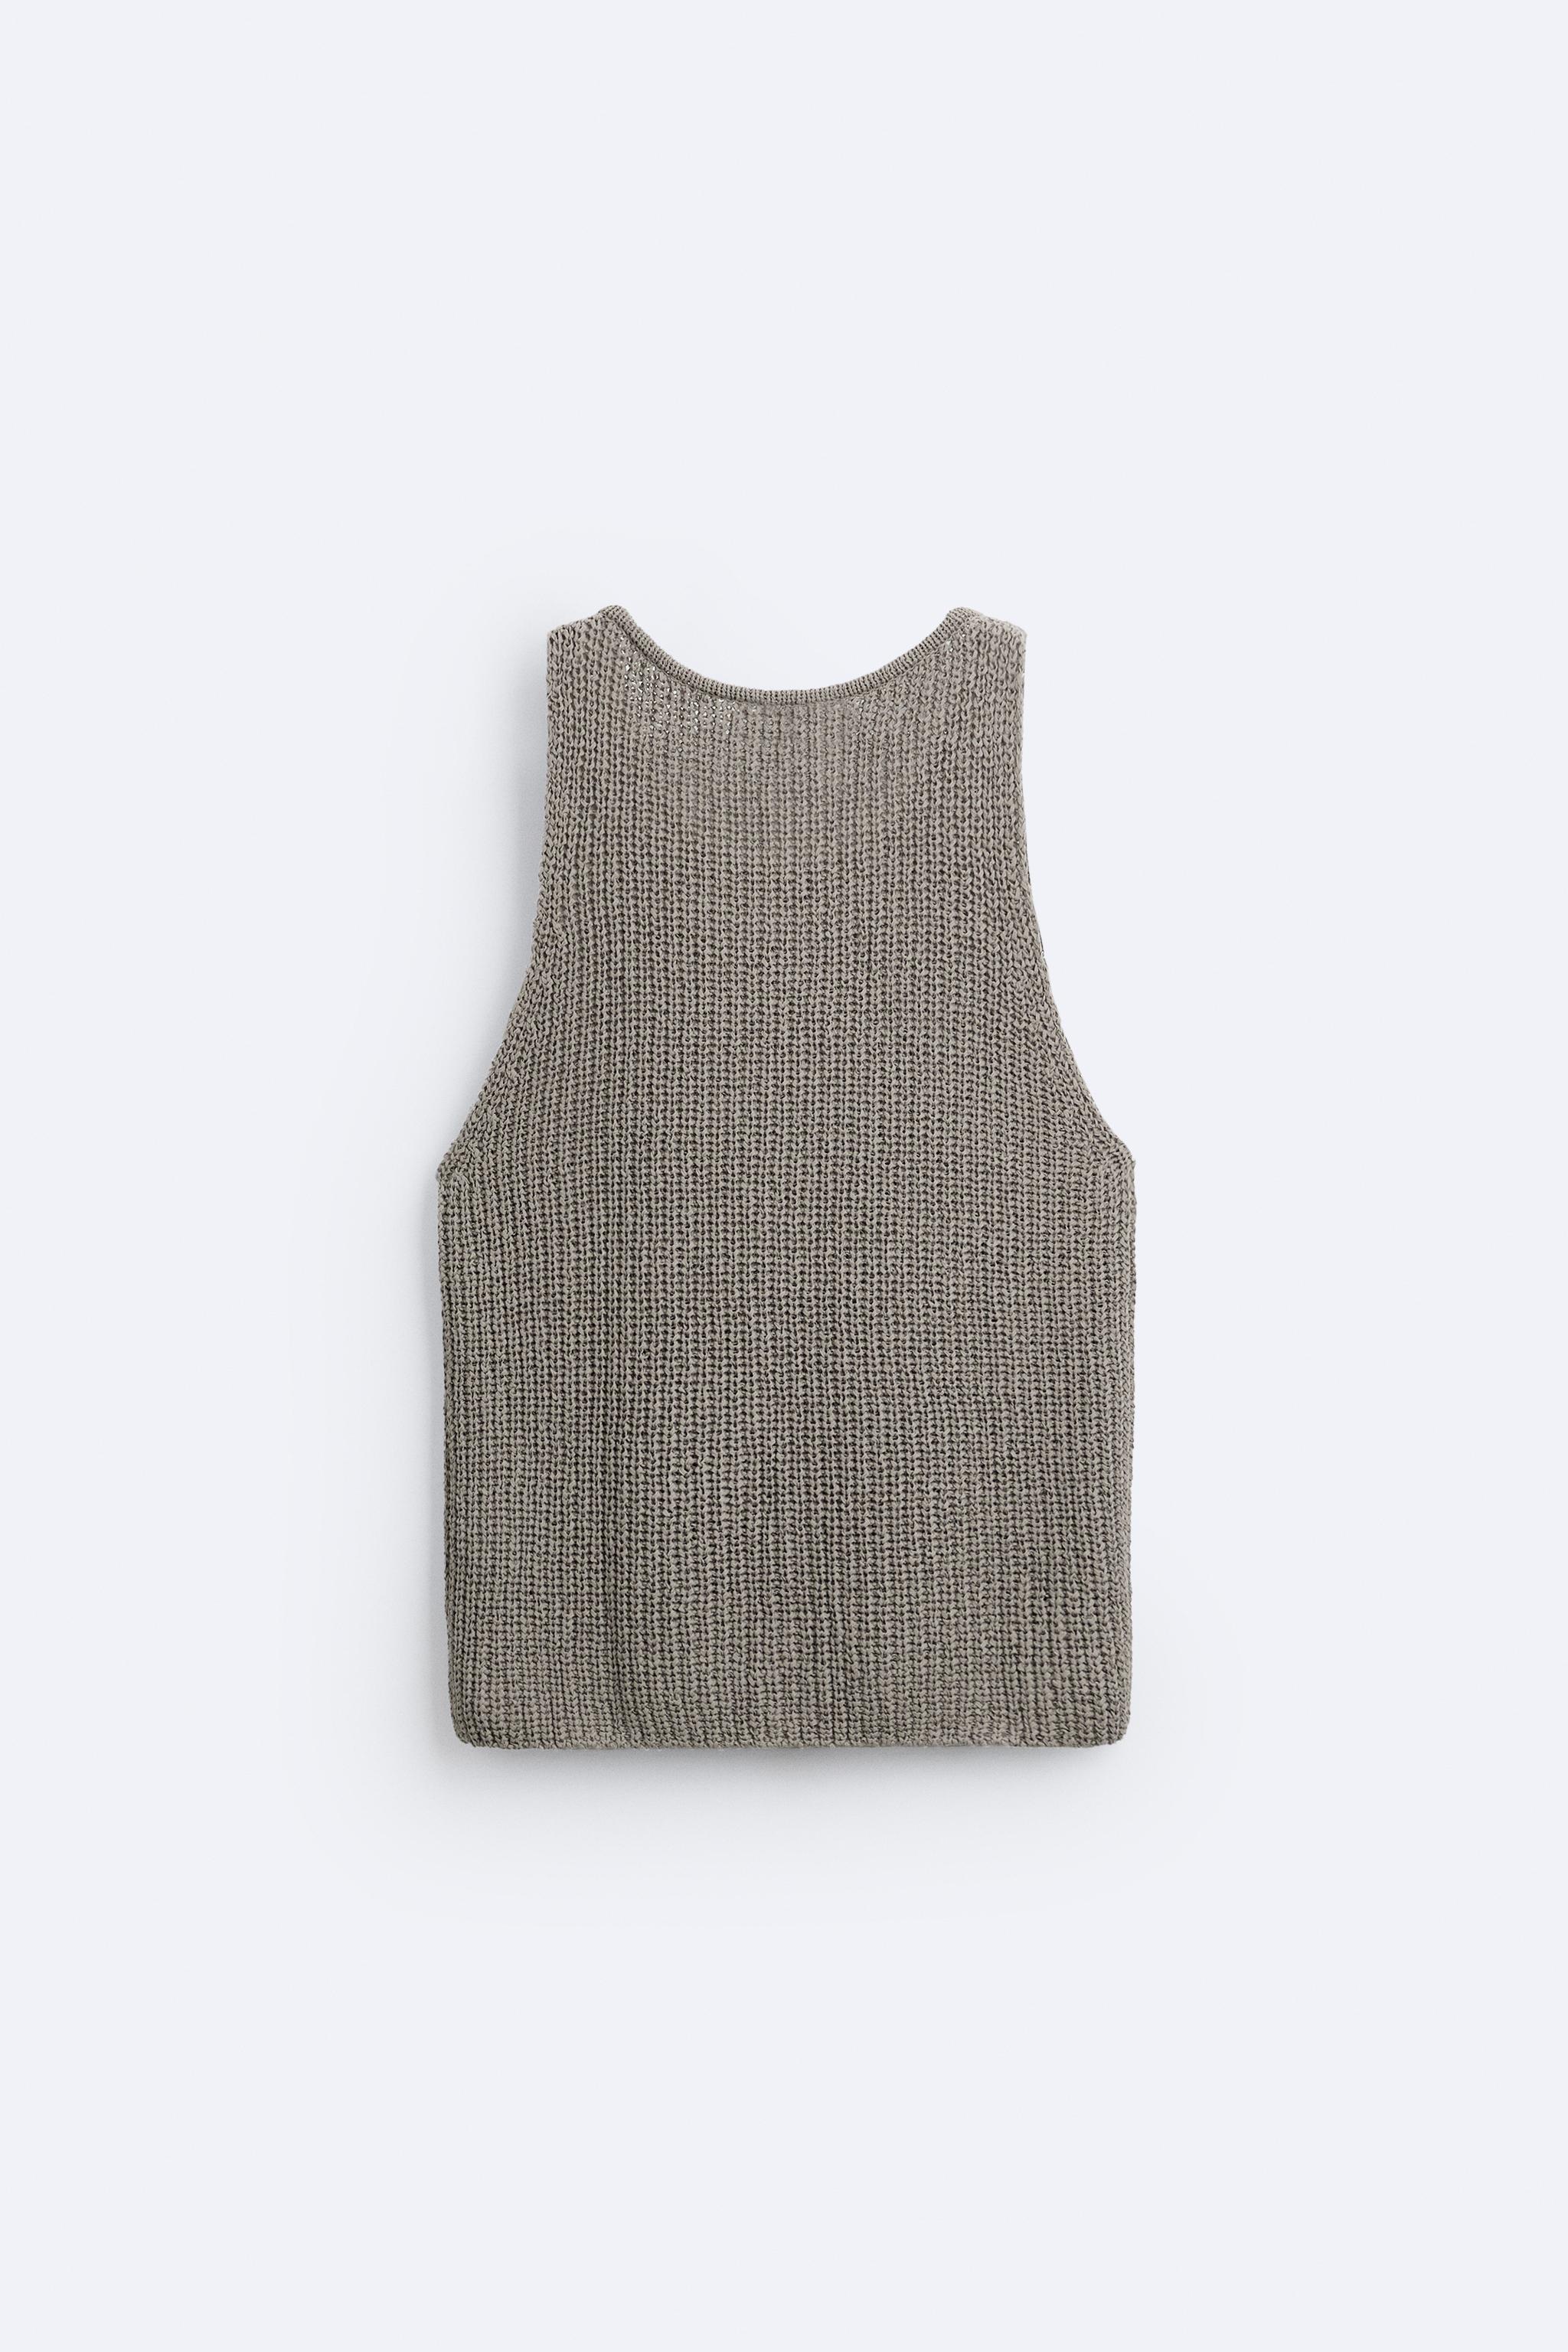 STRUCTURED MESH KNIT TANK - Taupe gray | ZARA Canada